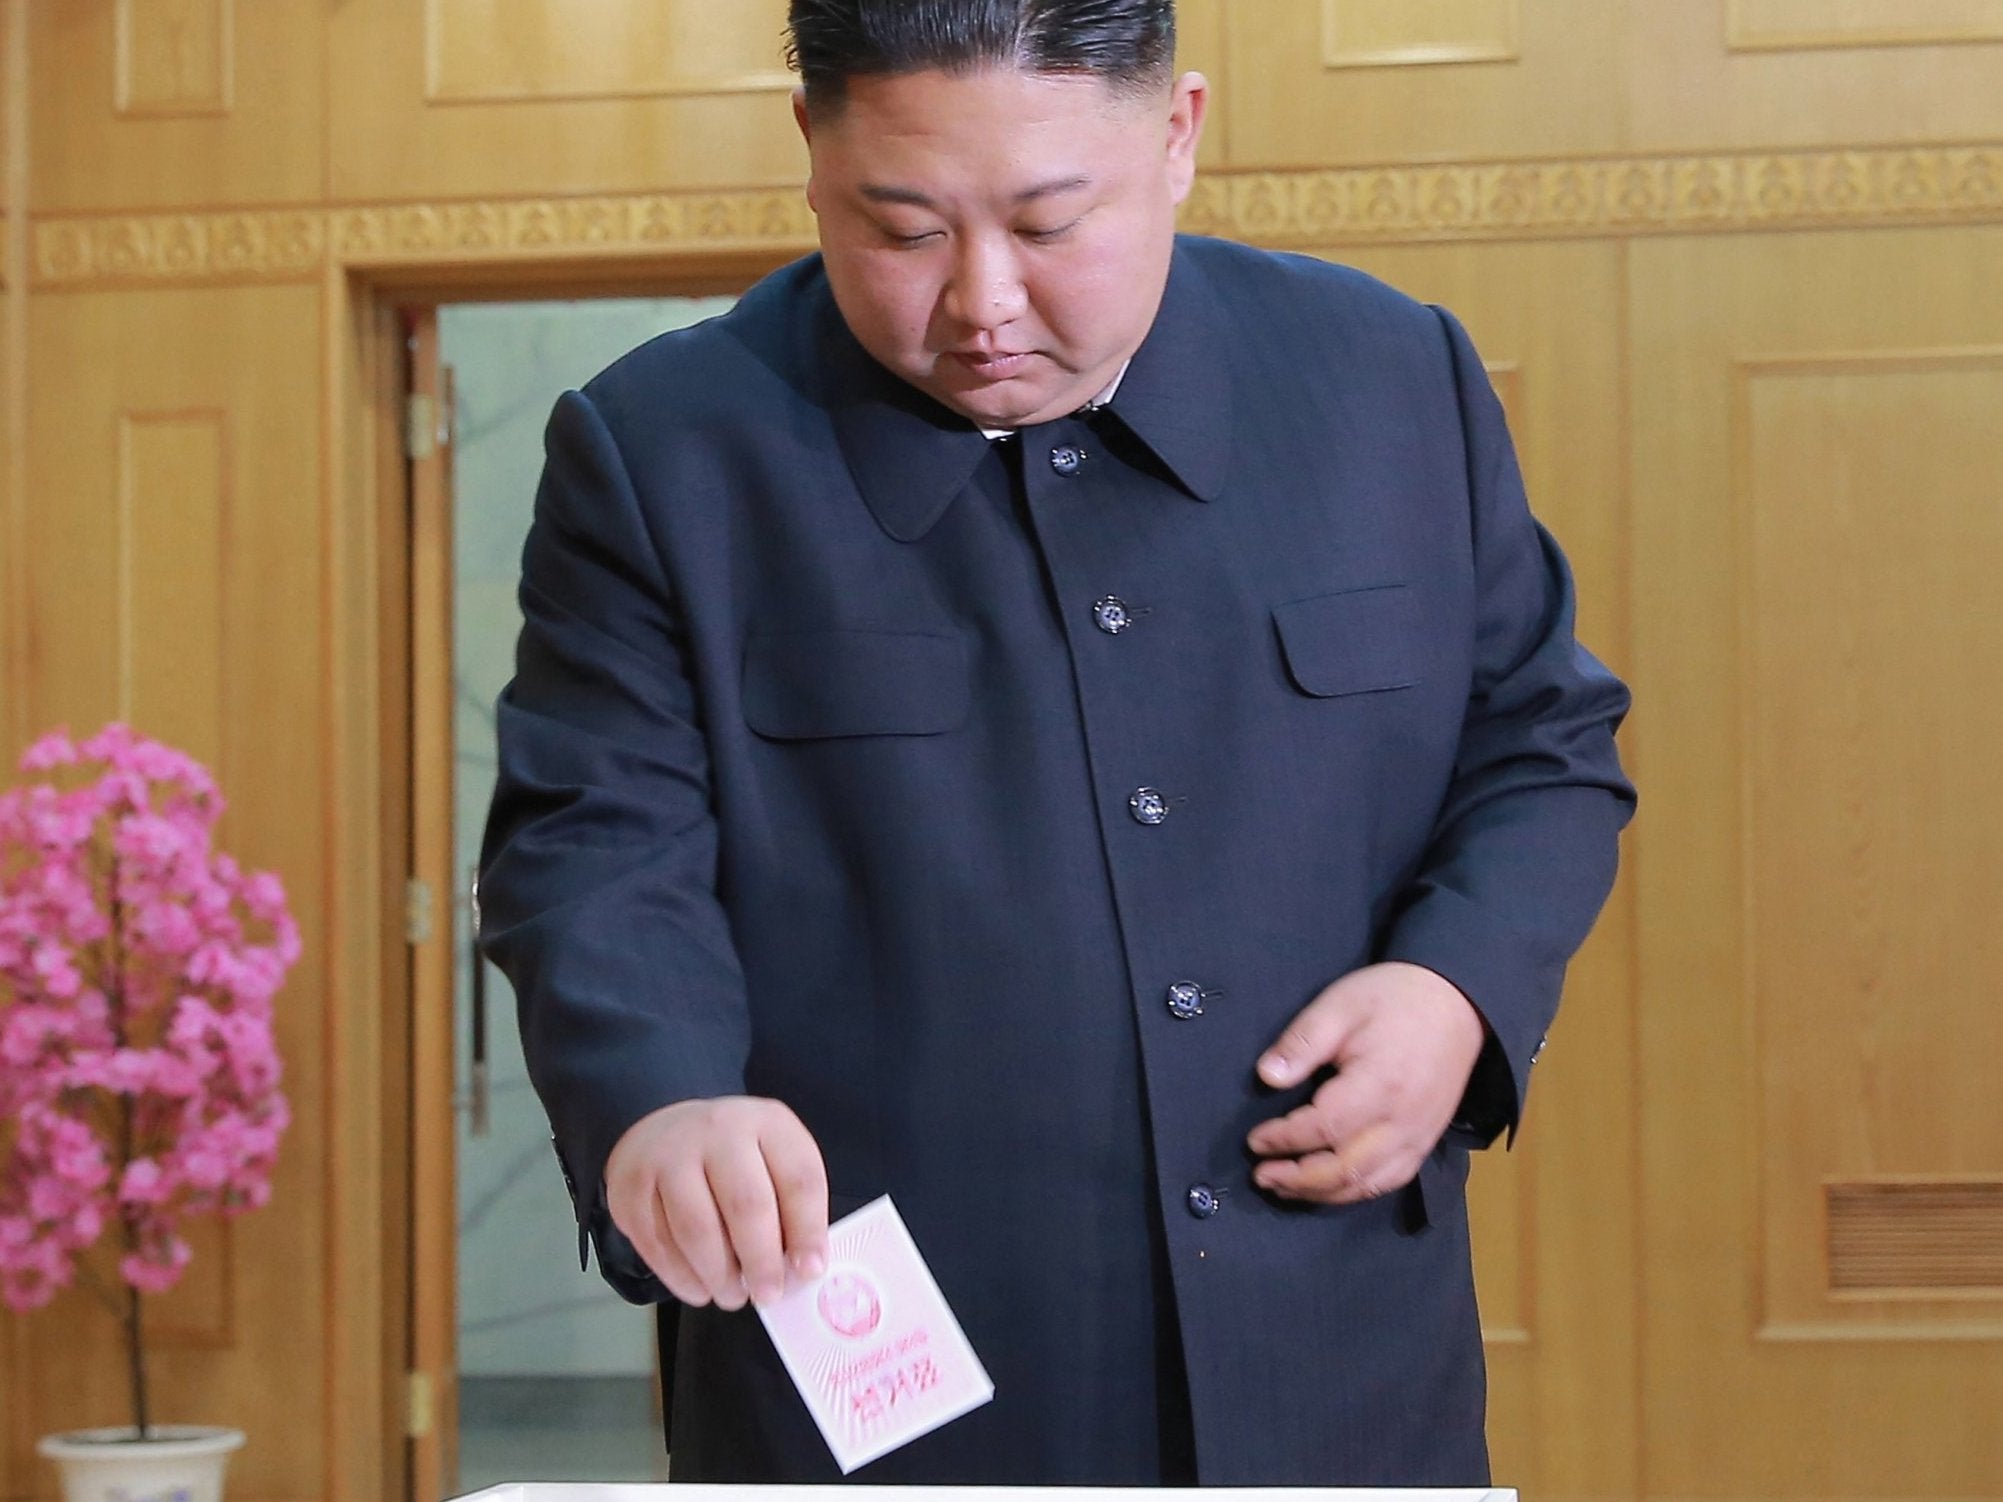 Kim Jong-un casts his ballot in his country's national elections